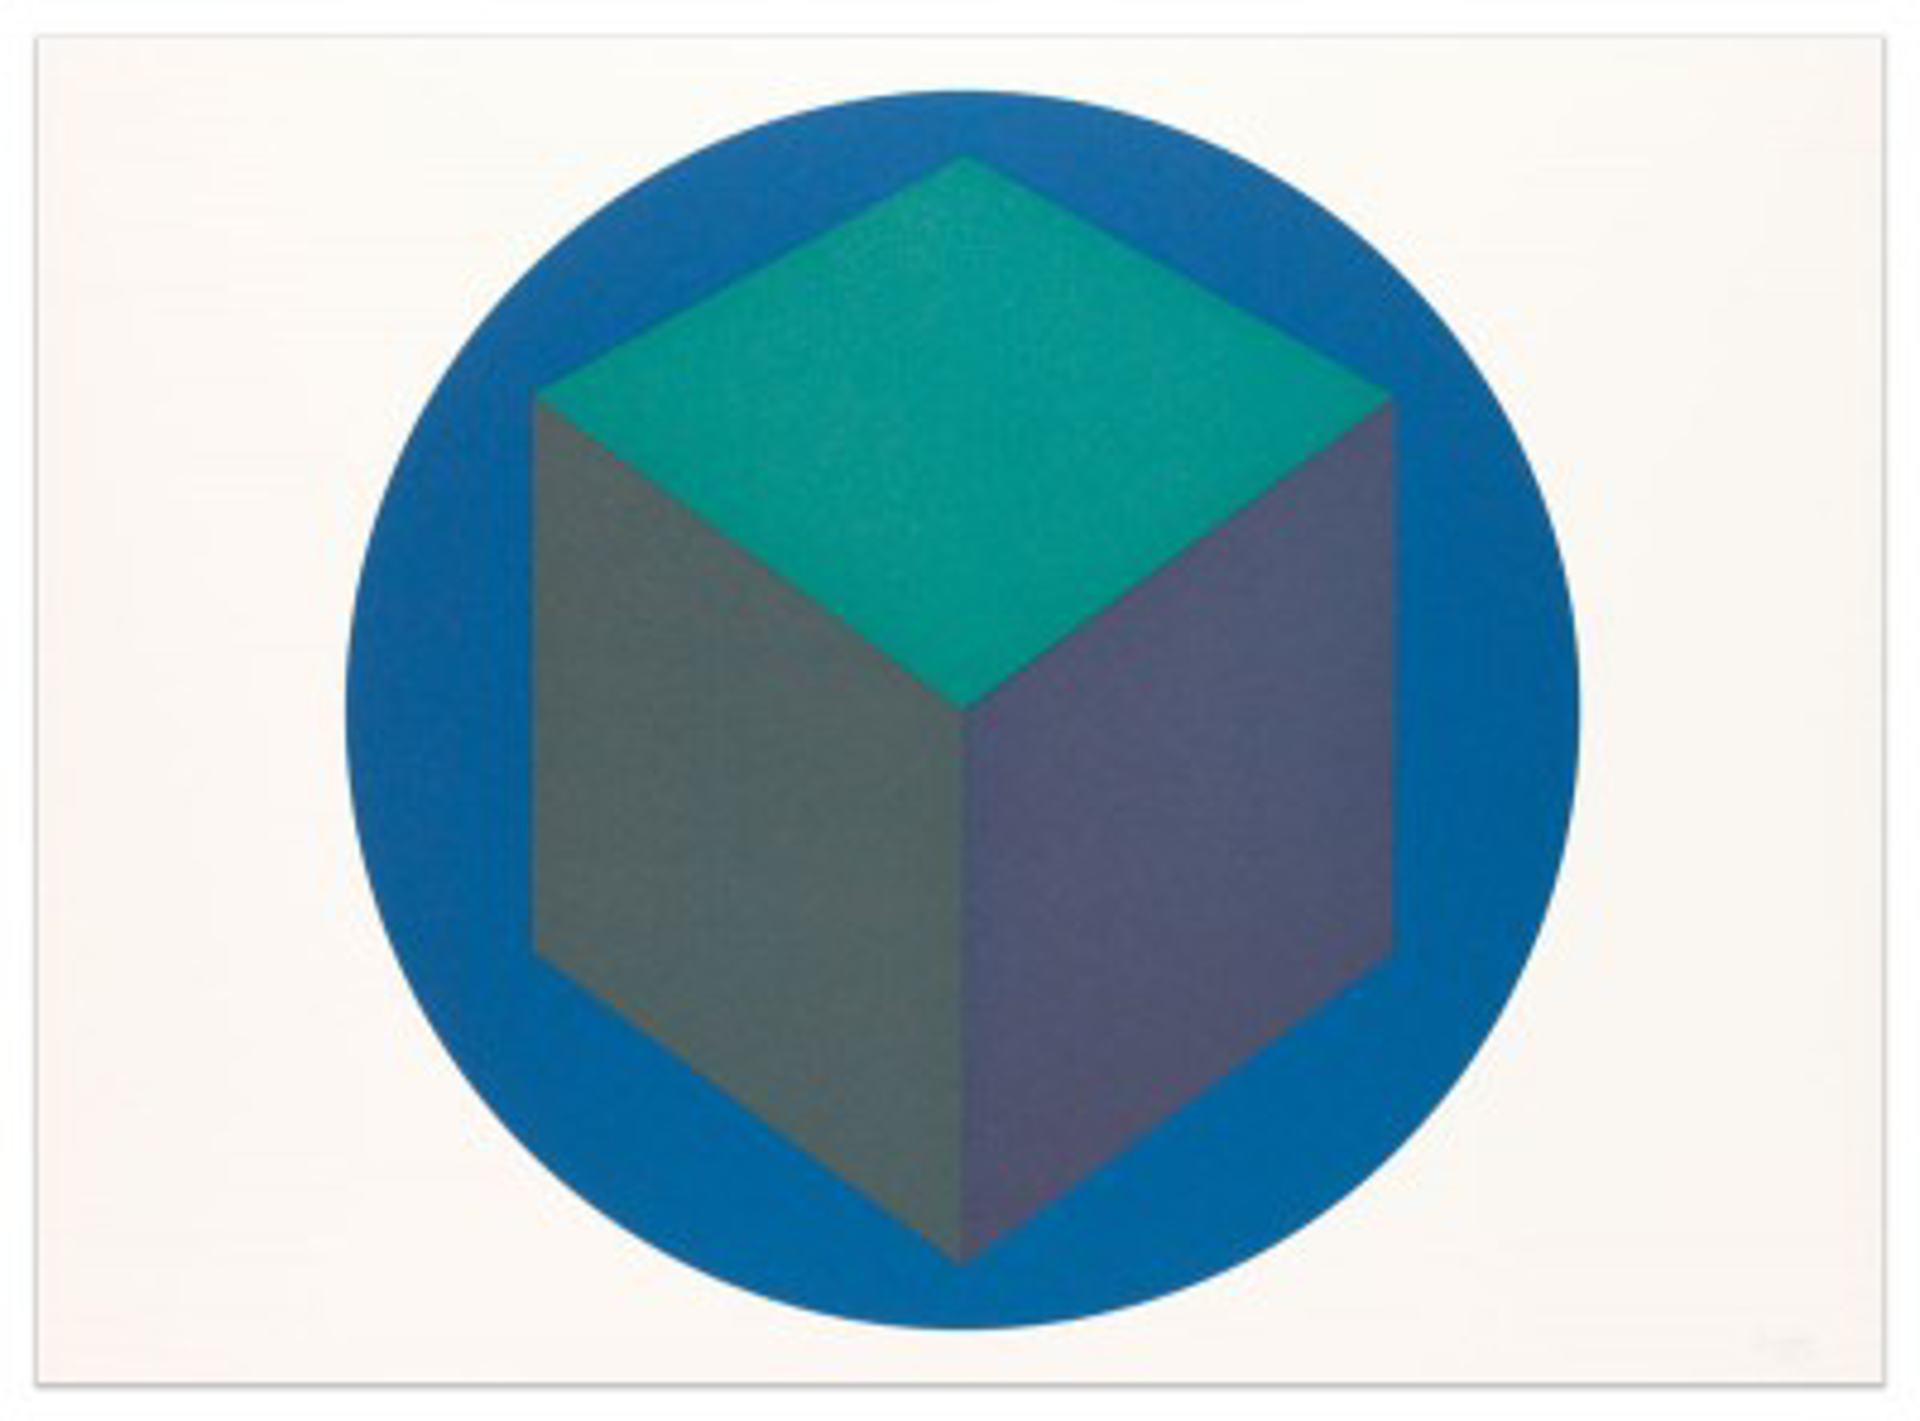 Centered Cube within a Blue Circle by Sol LeWitt